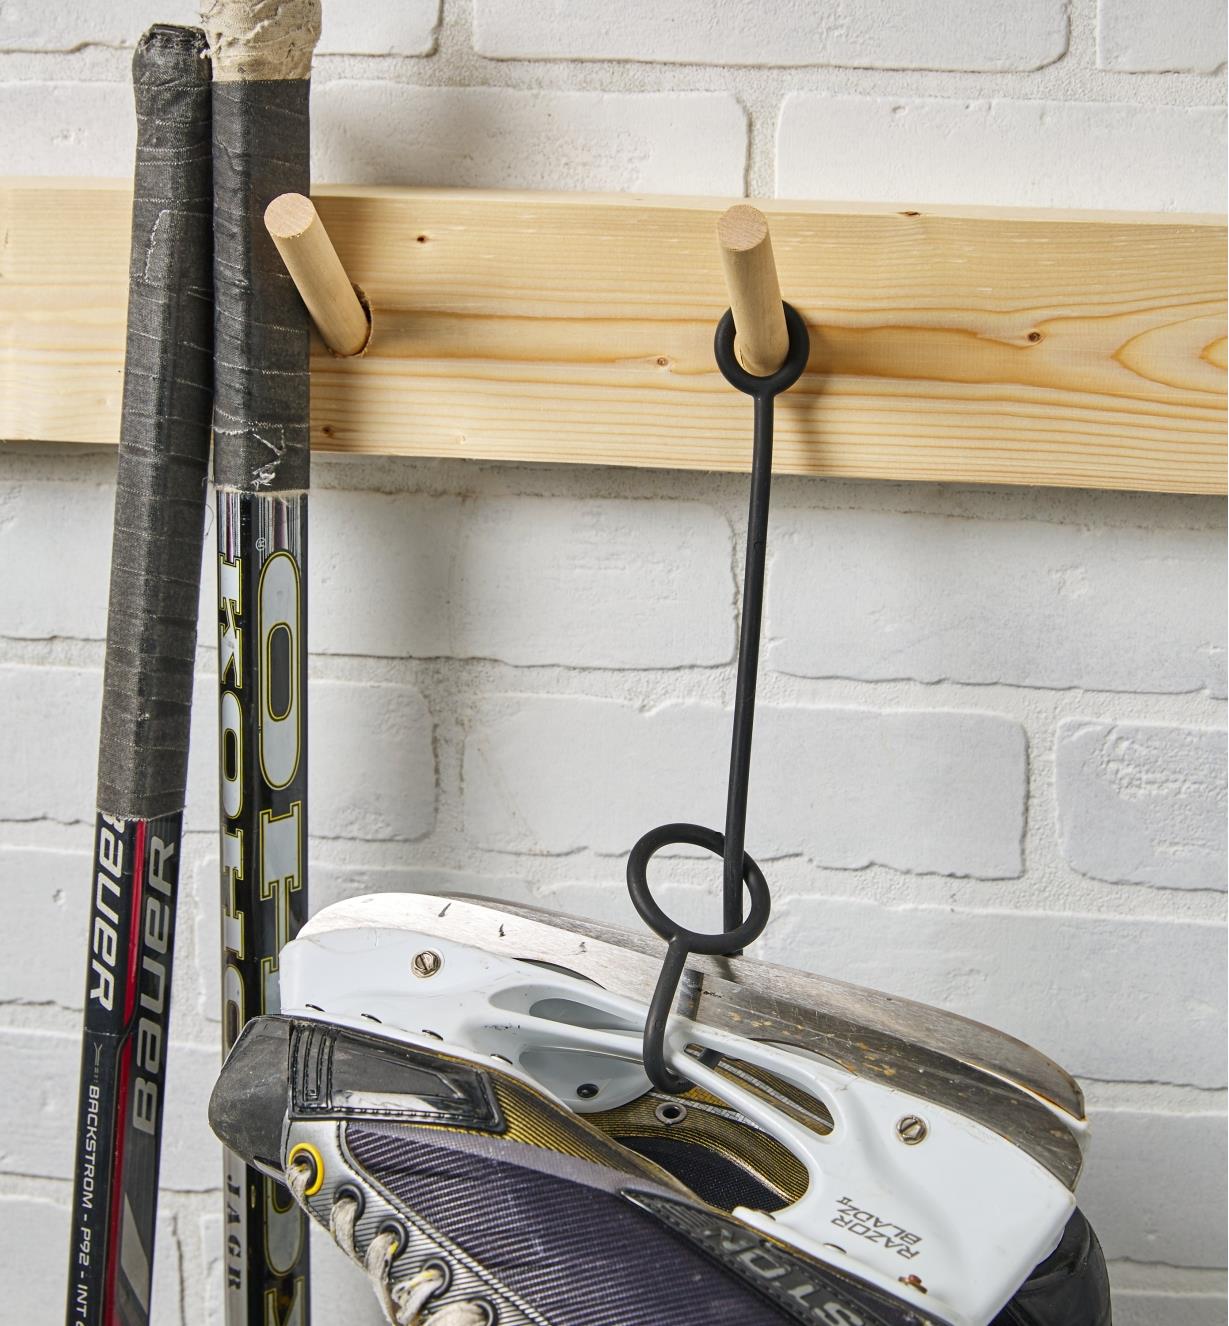 A KuVu strap holds a pair of hockey skates on a wall hook